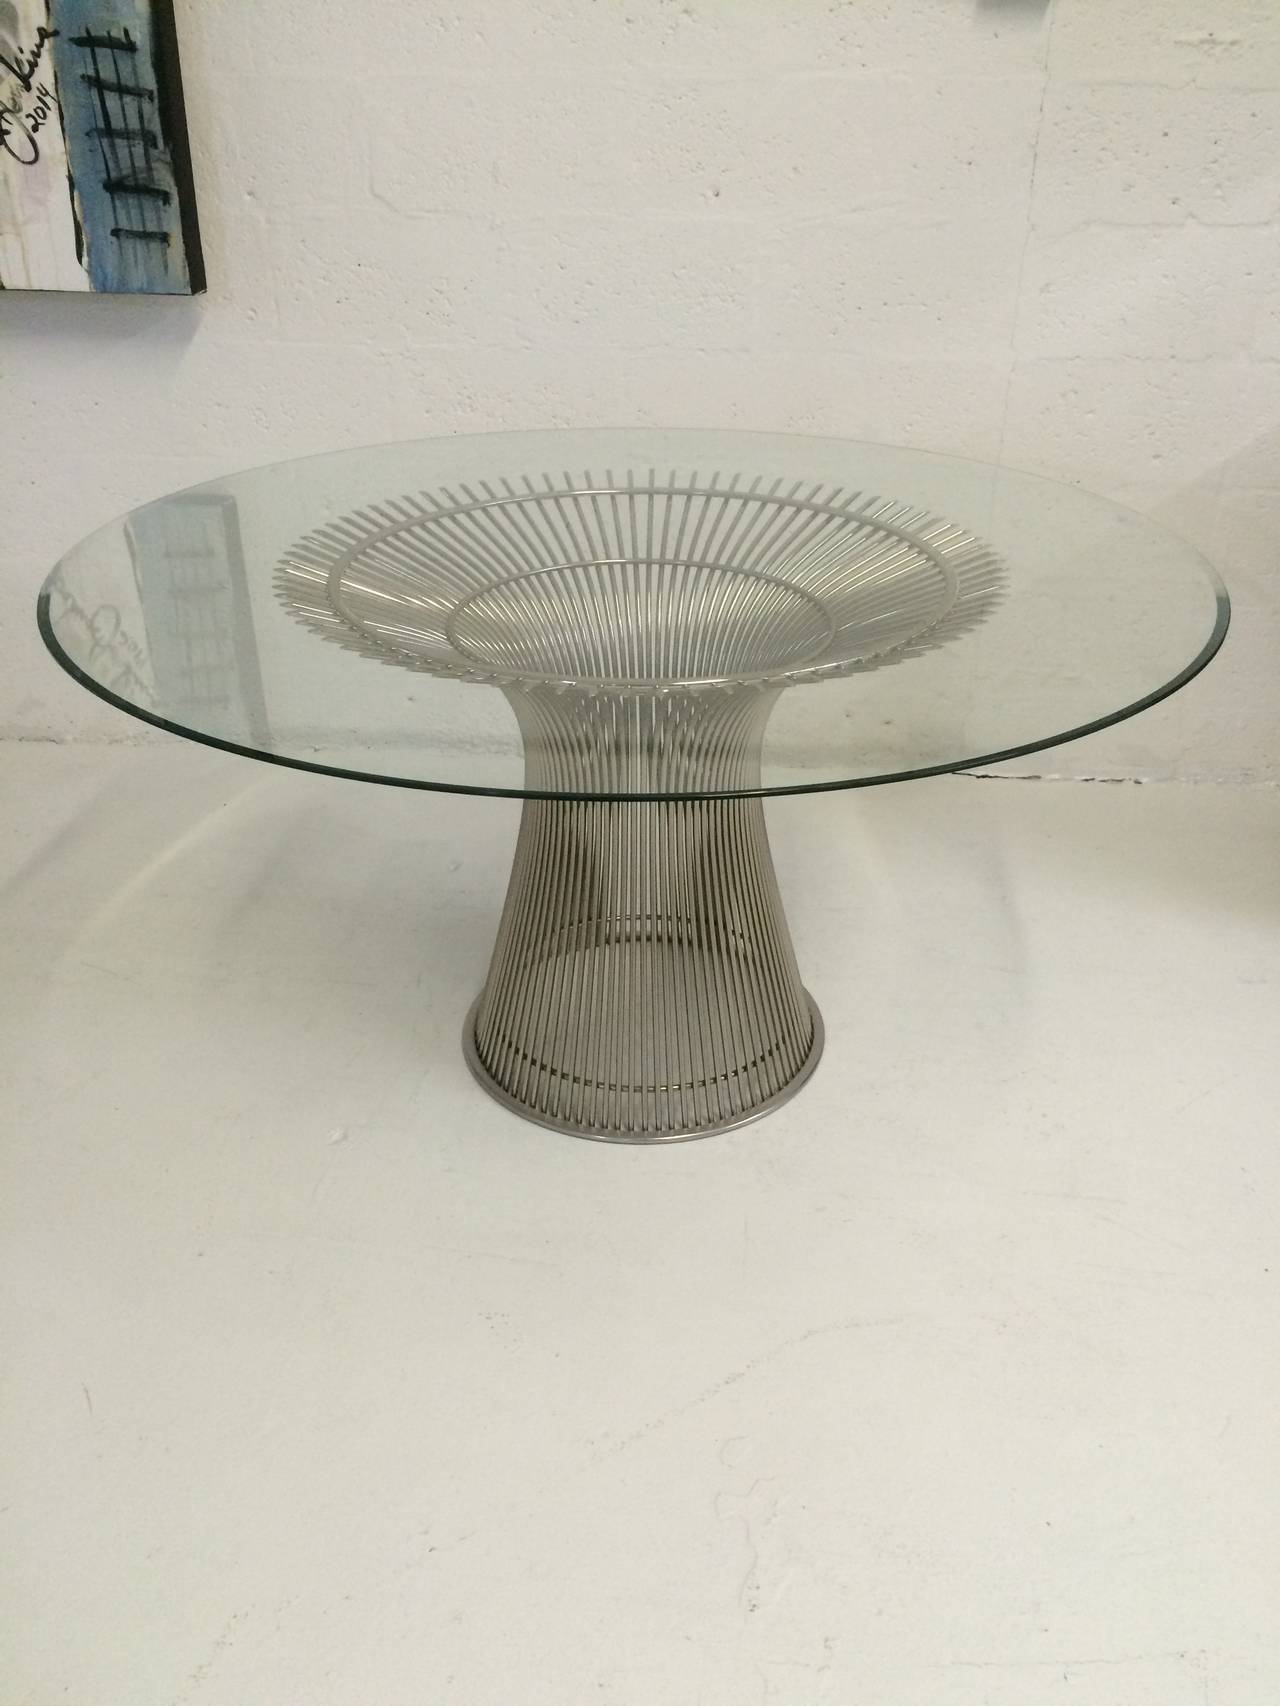 Nickel-plated steel and glass dining table designed by Warren Platner for Knoll Int.